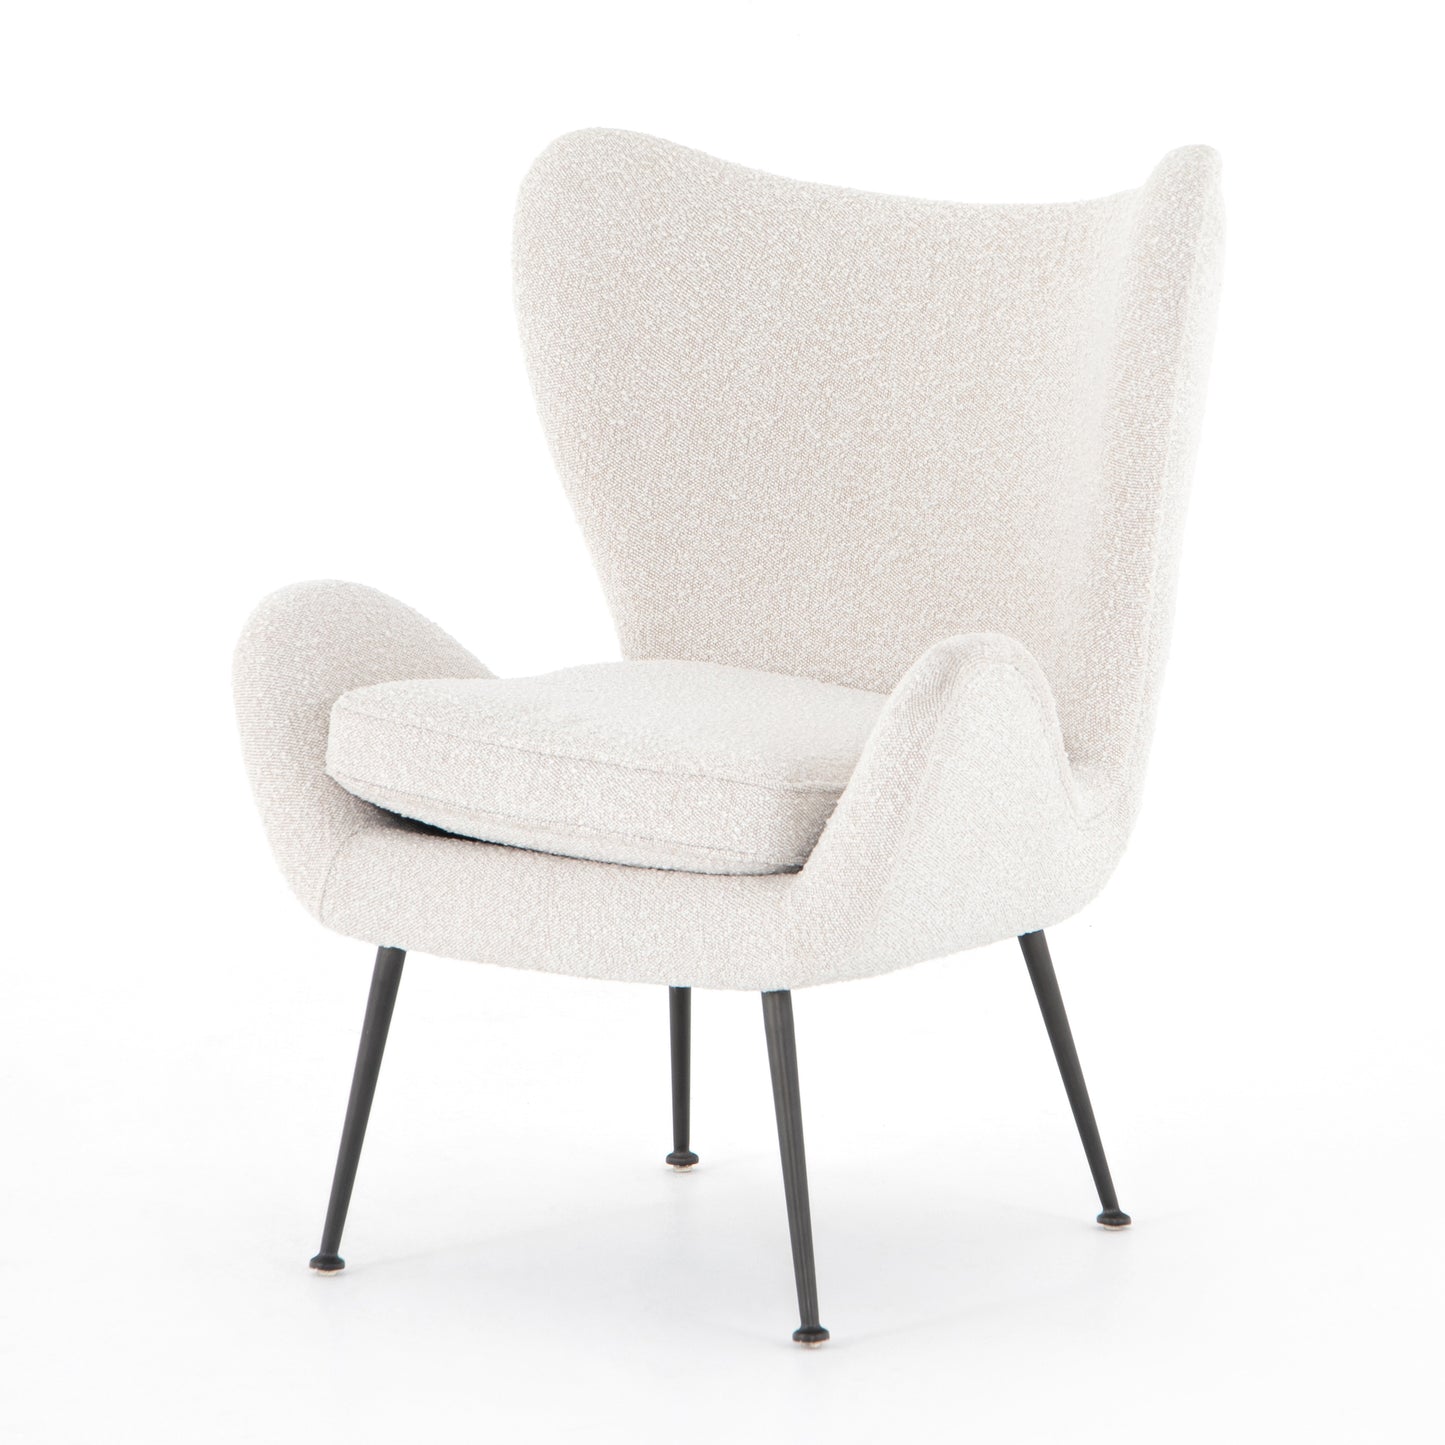 Wing chair with curves